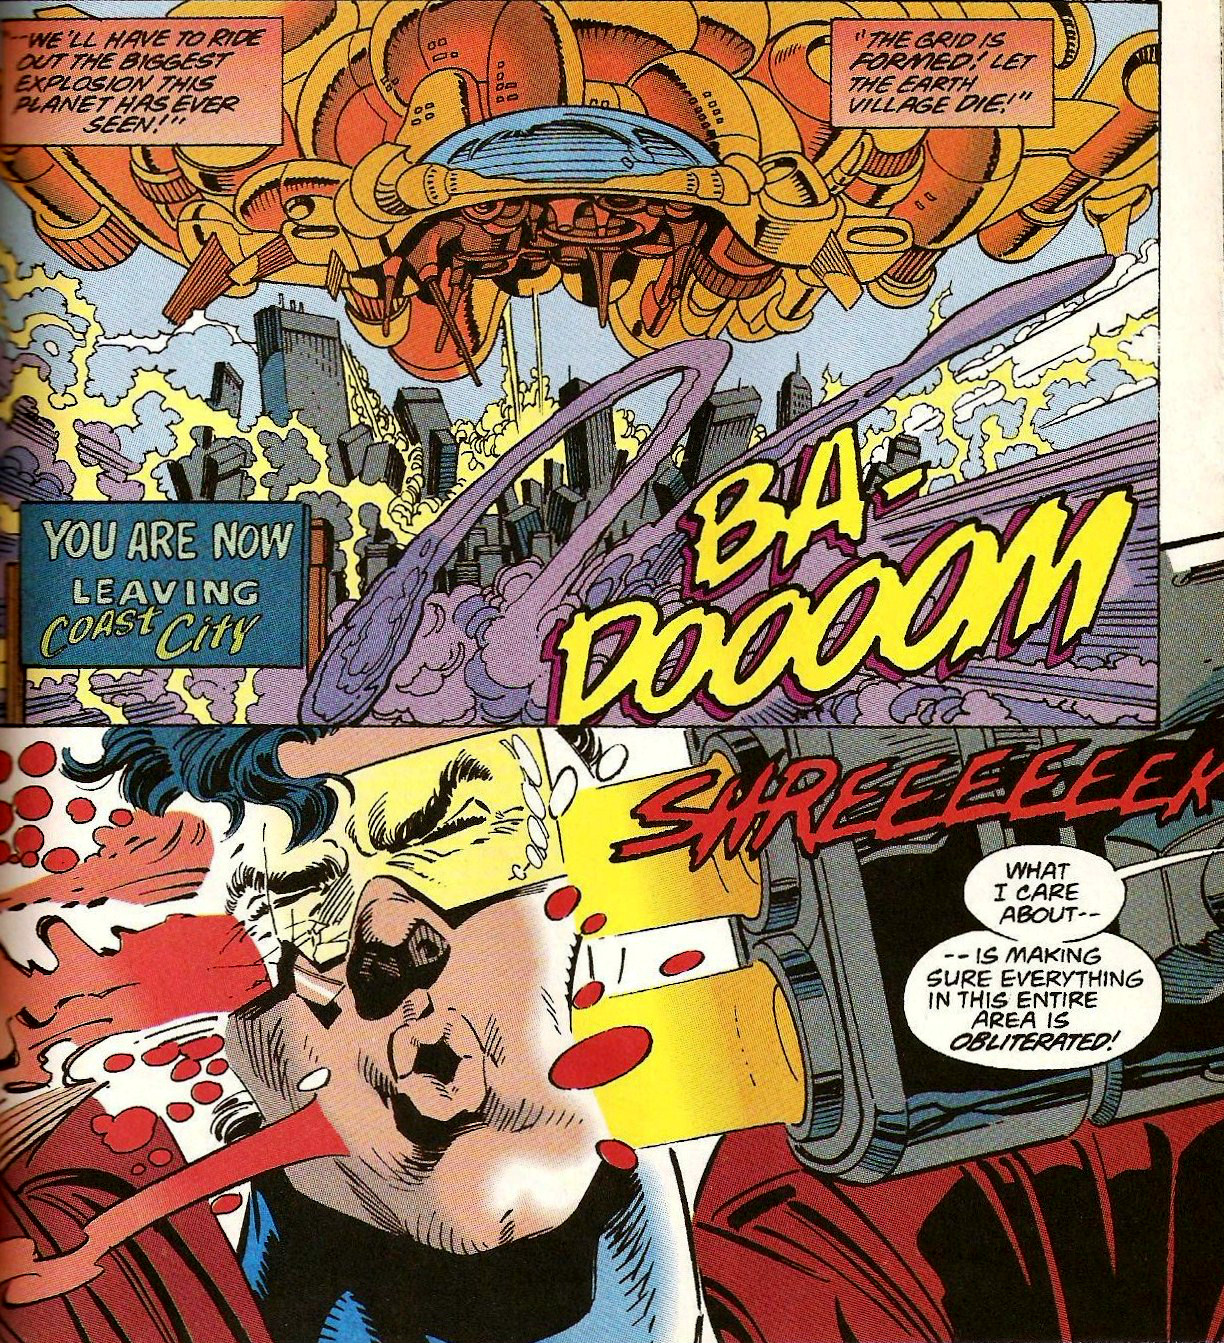 From Superman (Vol. 2) #80 (1993)